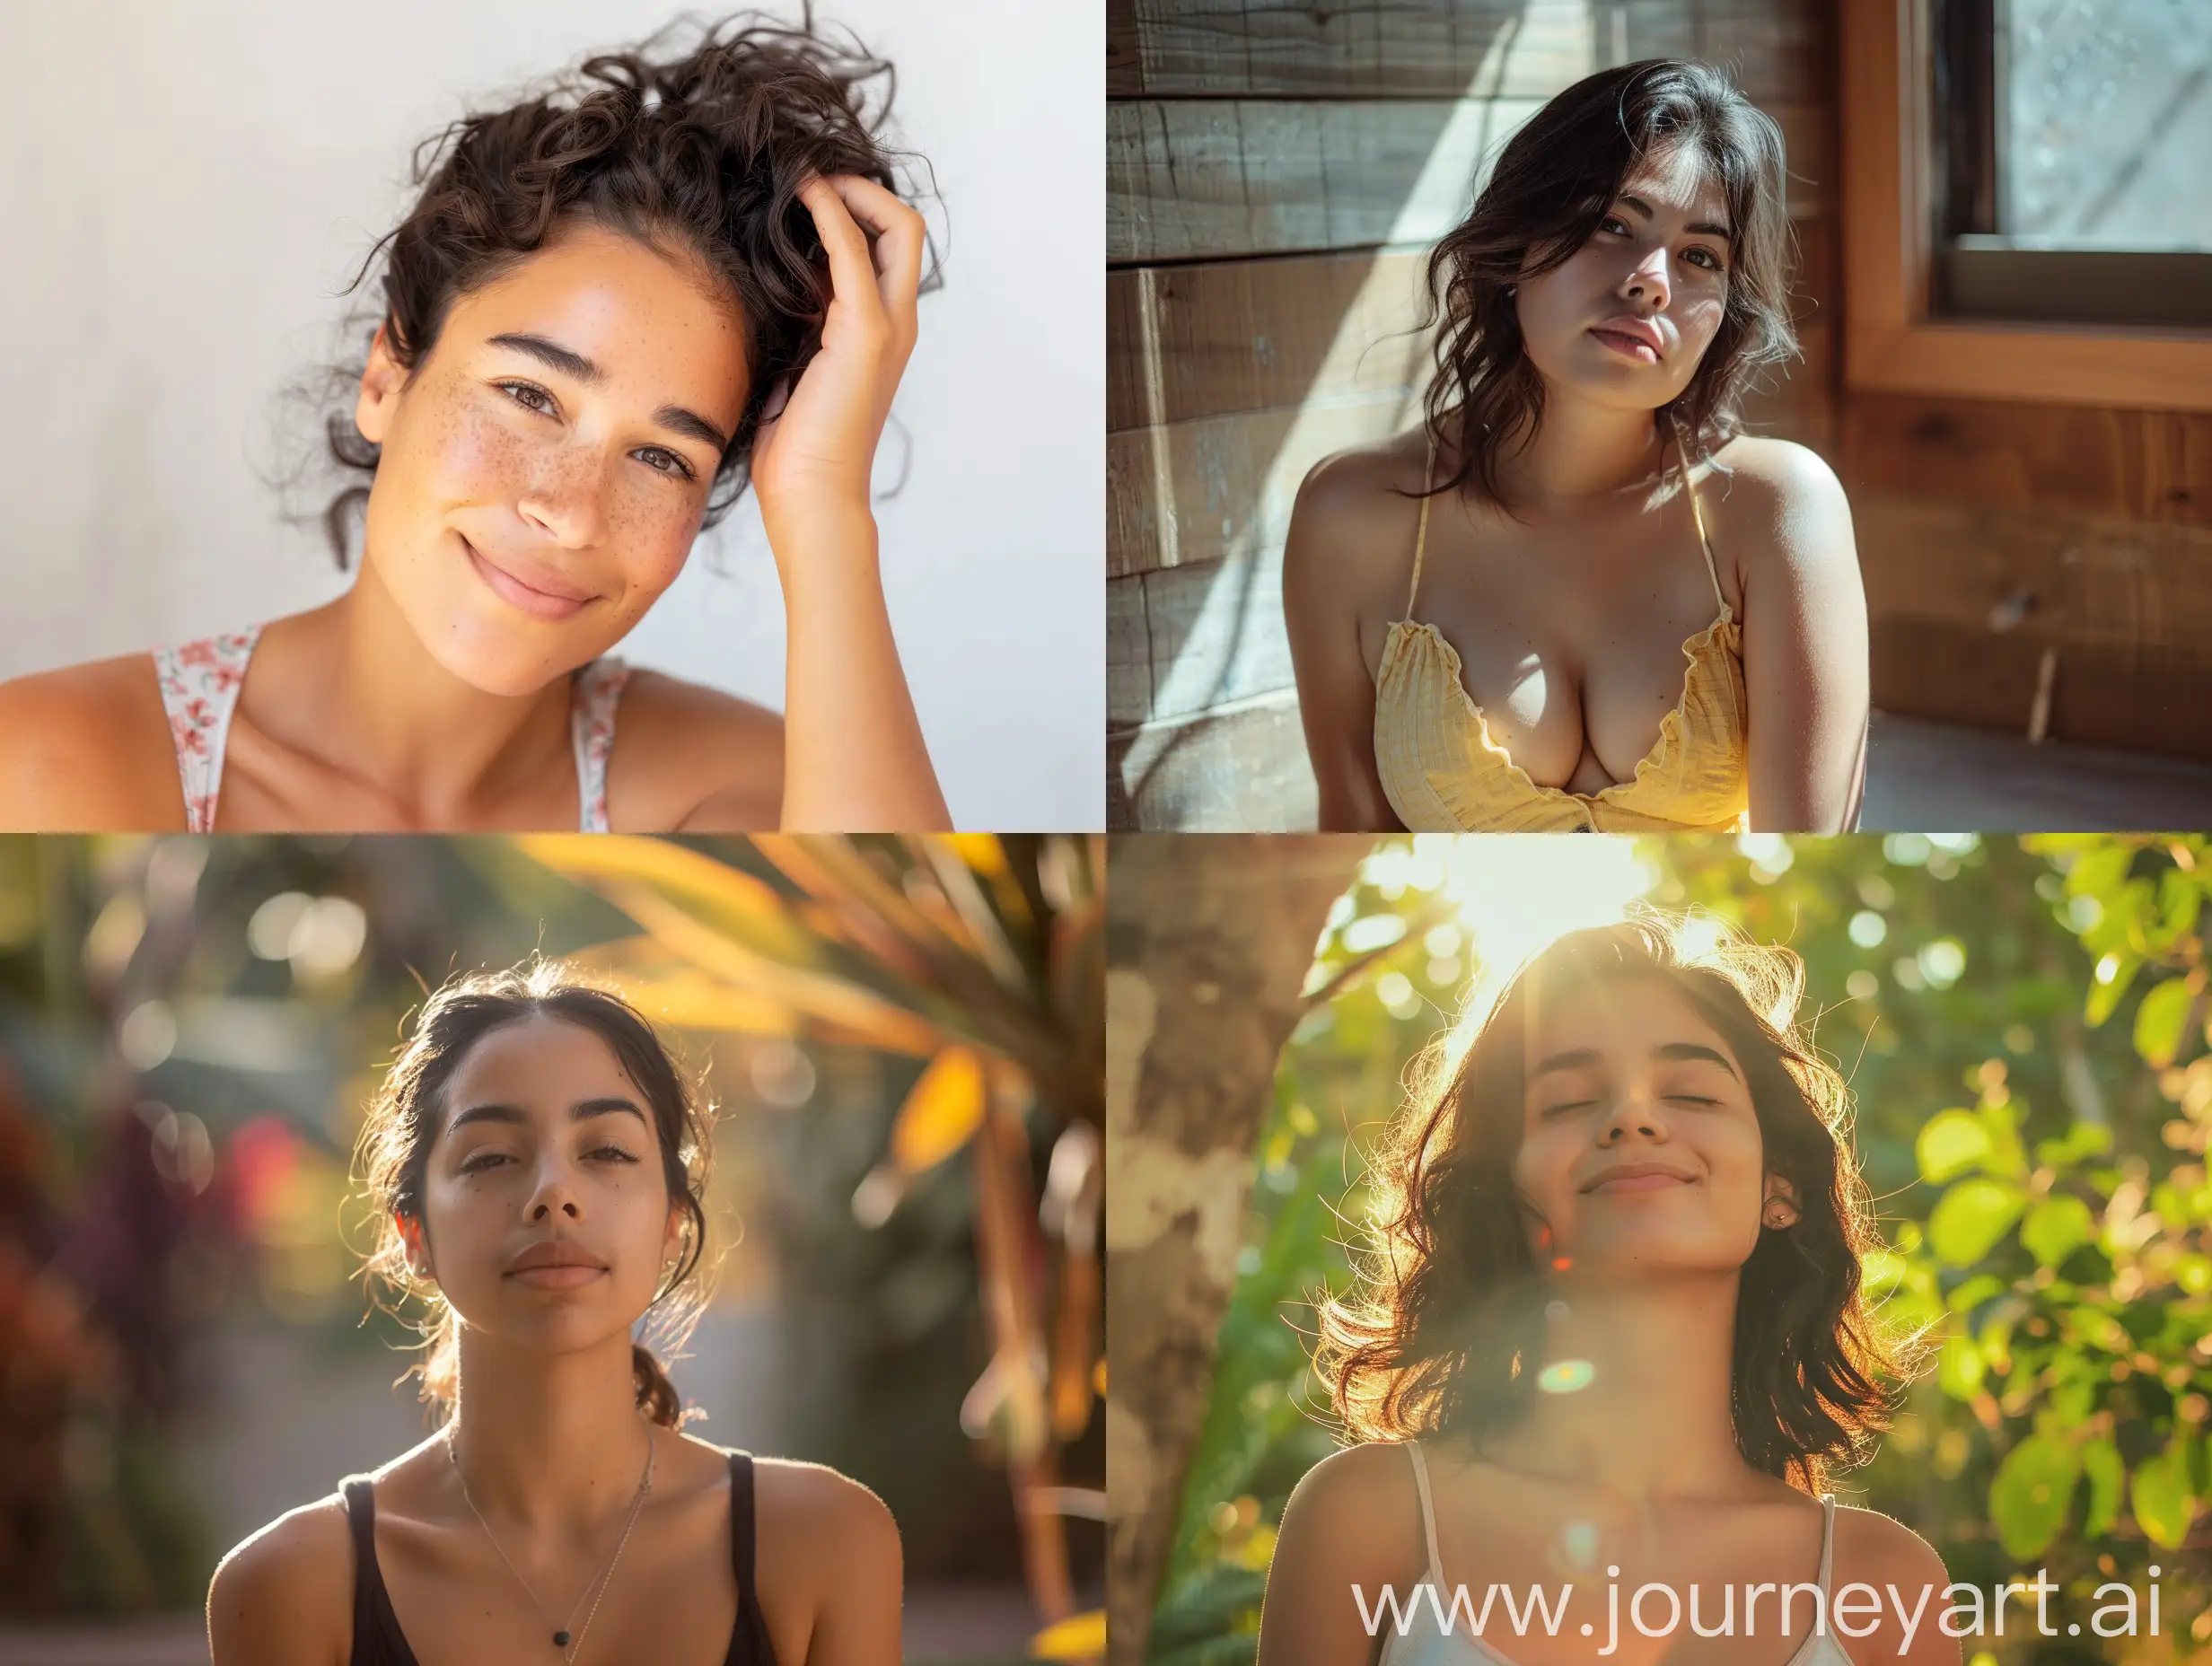 Authentic-Latino-Woman-Embracing-Emotional-Wellbeing-in-Natural-Light